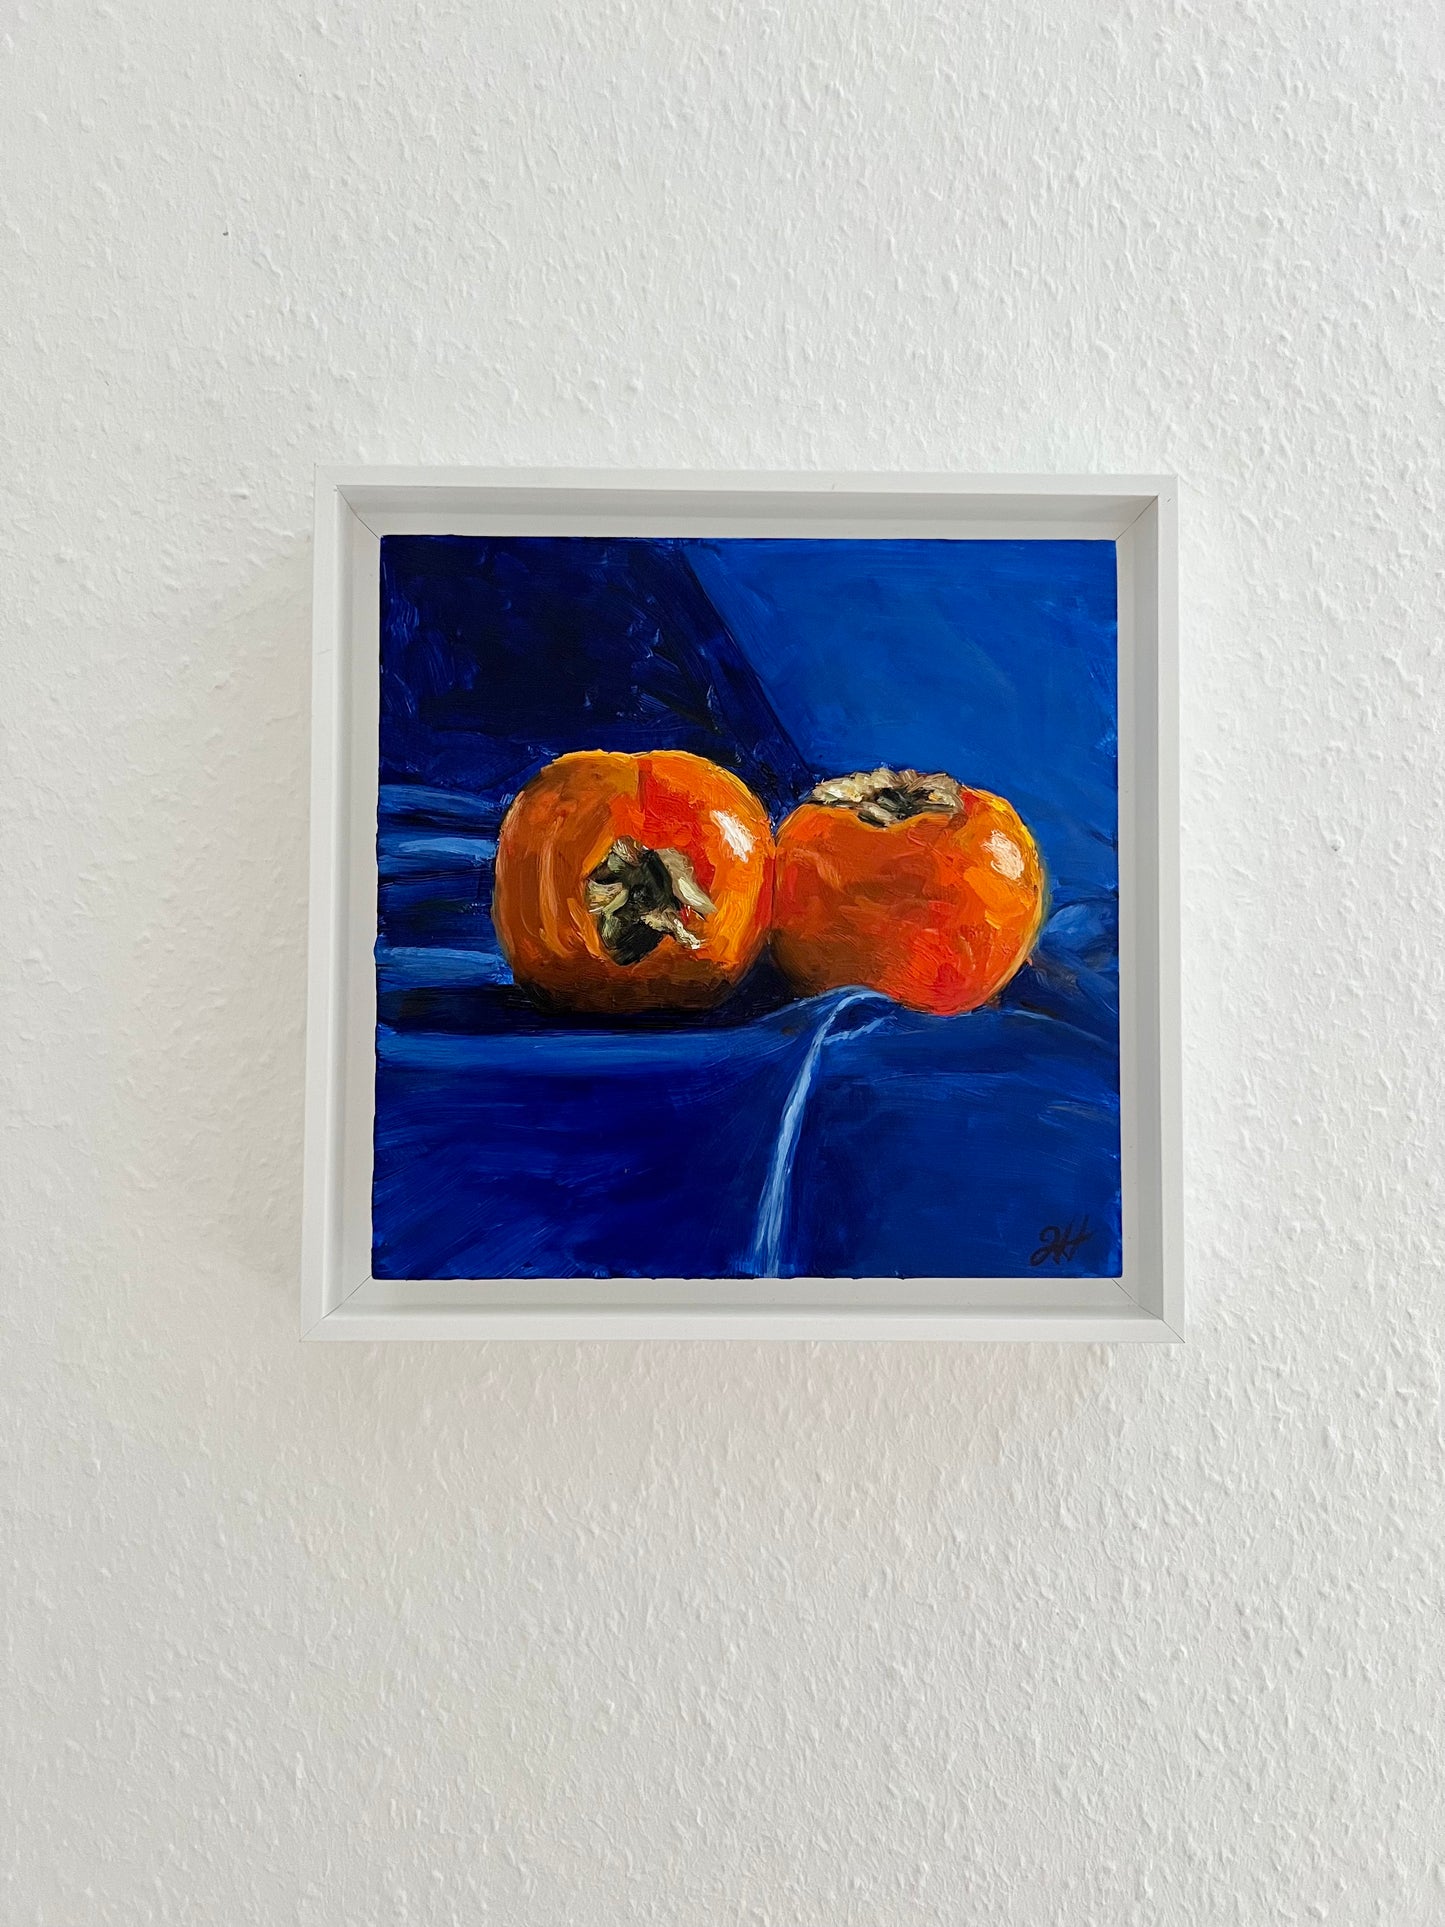 Persimmons on royal blue